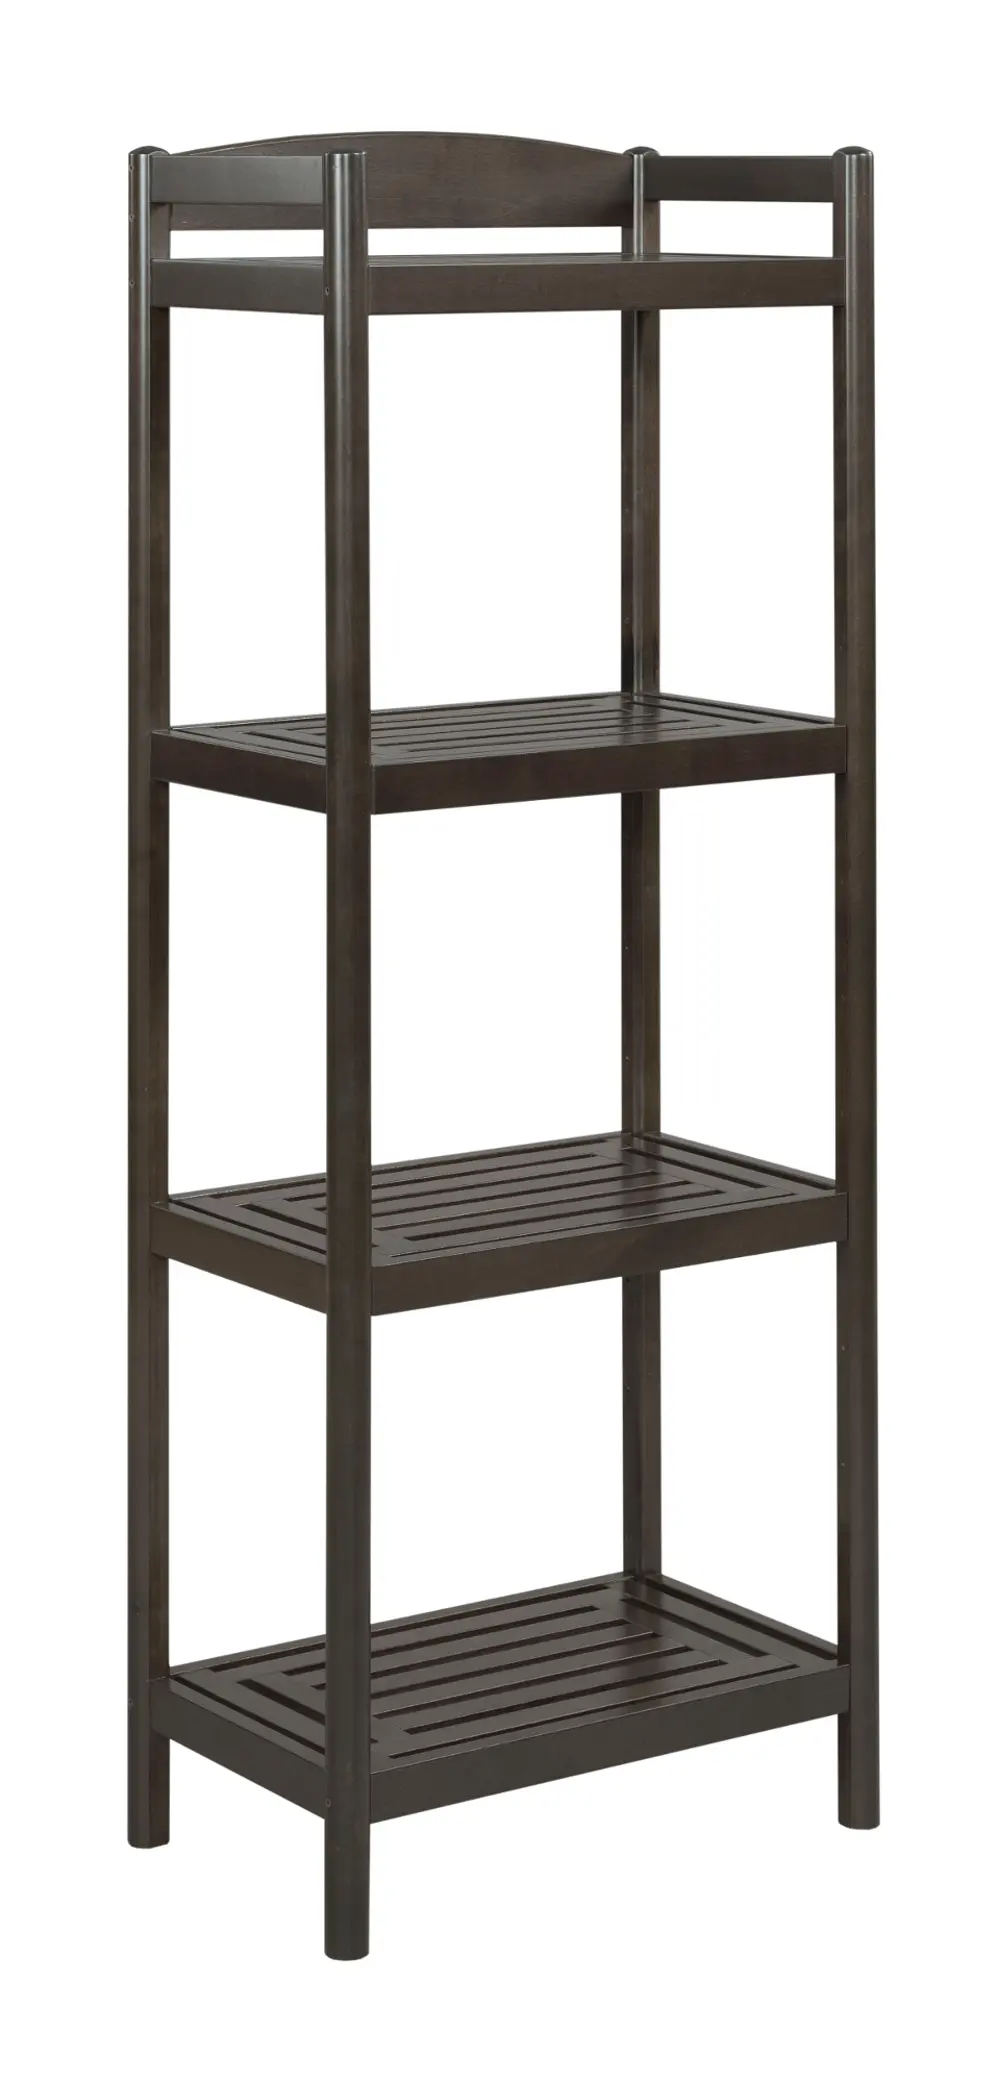 Adjustable Espresso Wooden Tall Bookcase / Media Tower - Exmore-1